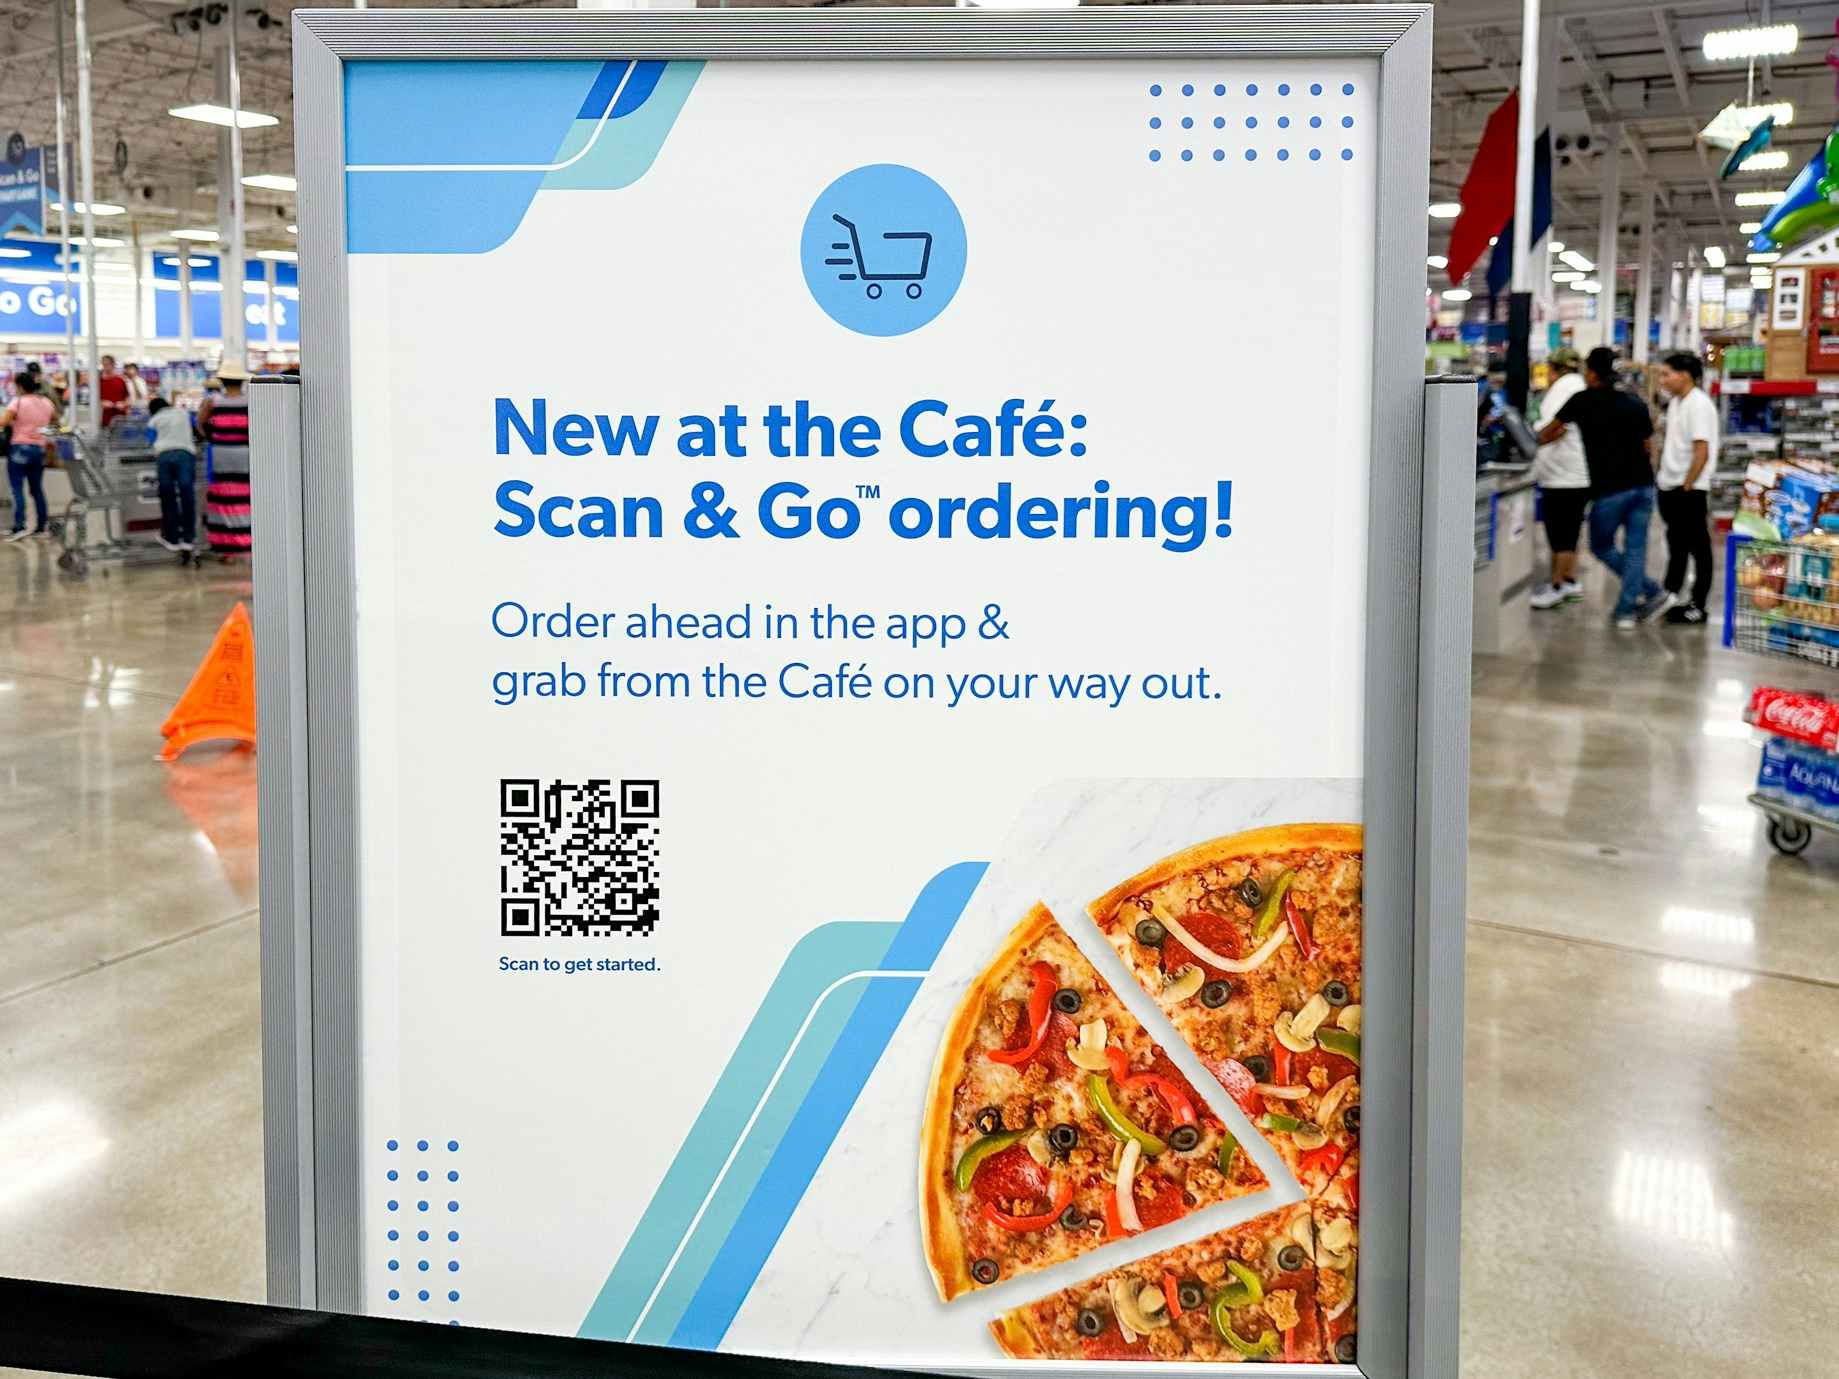 sams-club-cafe-scan-and-go-ordering-app-sign-kcl